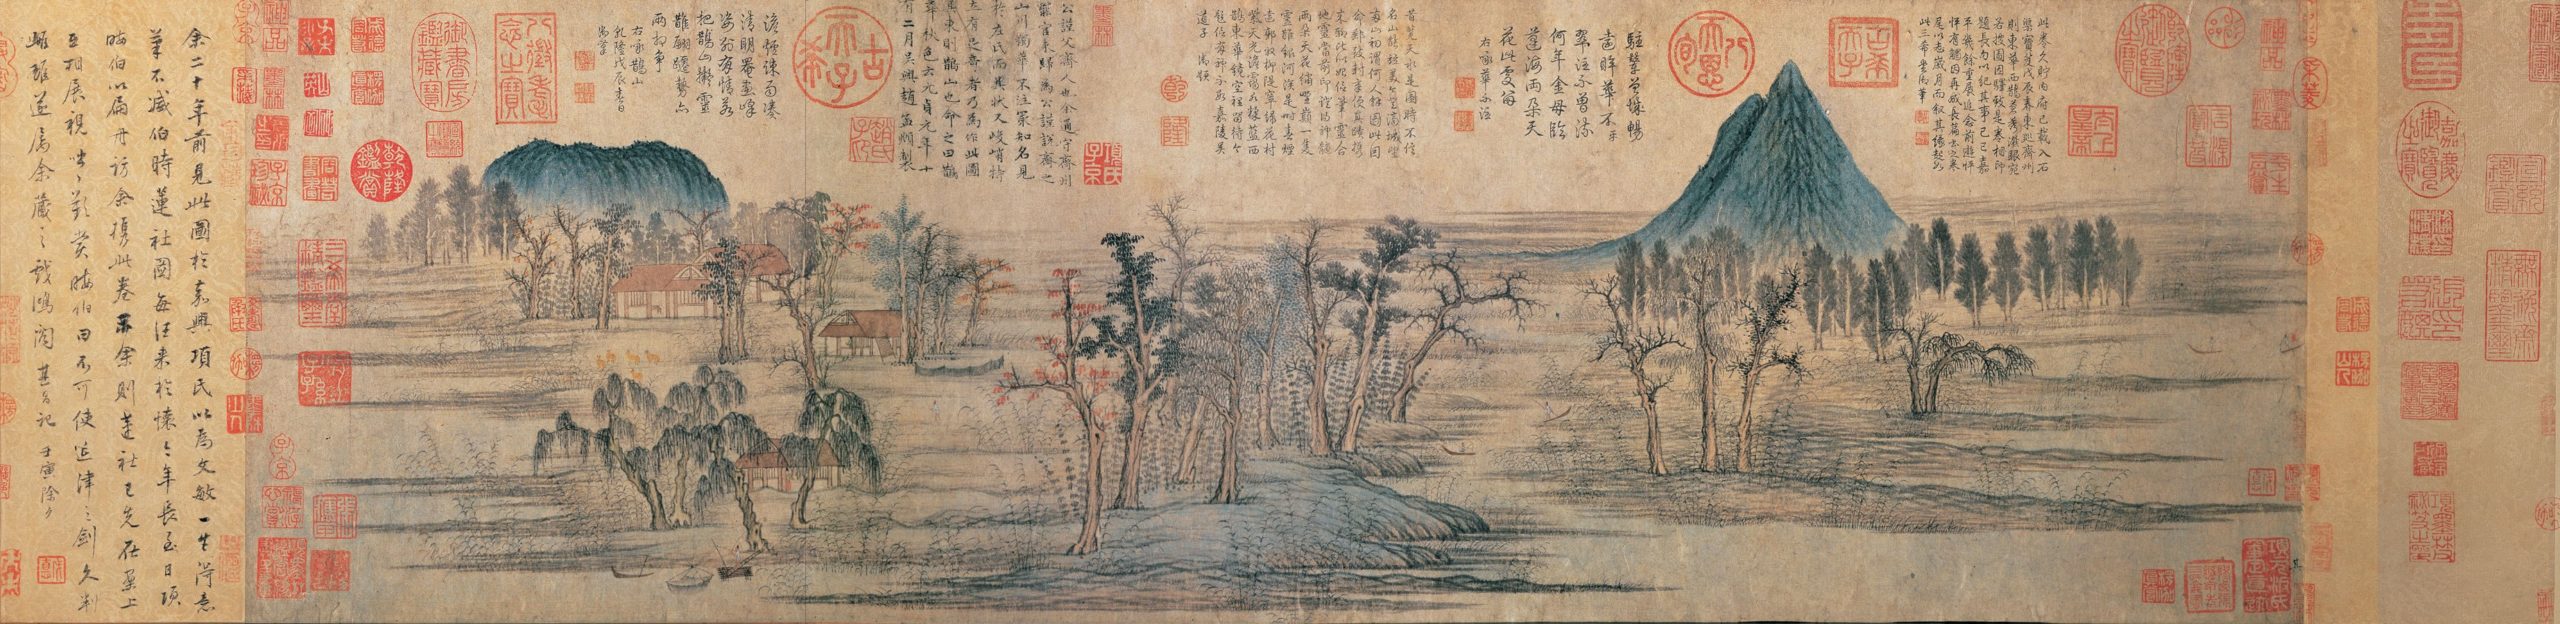 Zhao Mengfu, Autumn Colors on the Que and Hua Mountains, 1295, ink and colors on paper, 28.4 x 93.2 cm (National Palace Museum, Taipei)